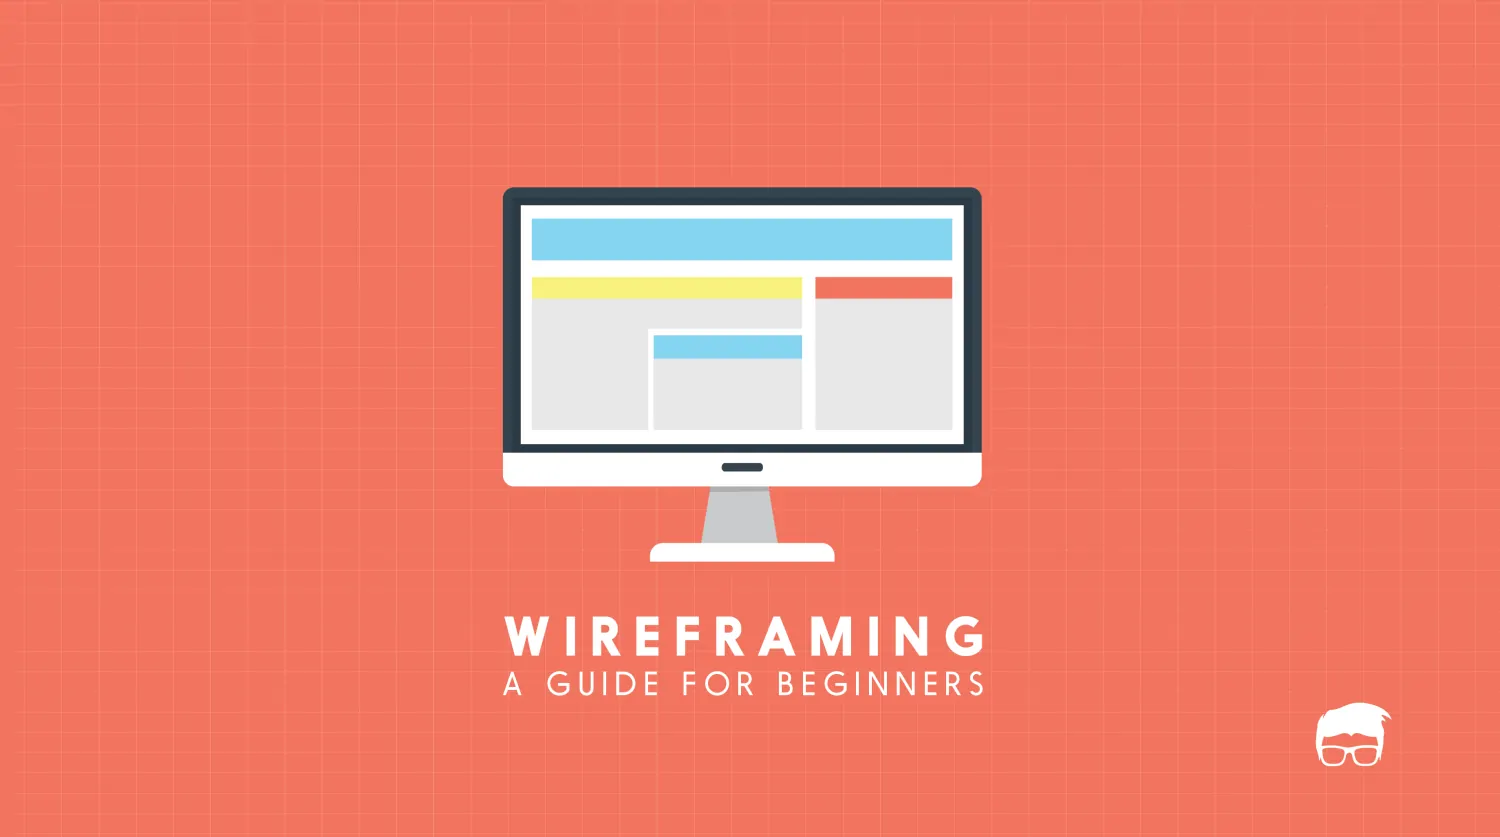 Wireframing 101: A Guide for Beginners